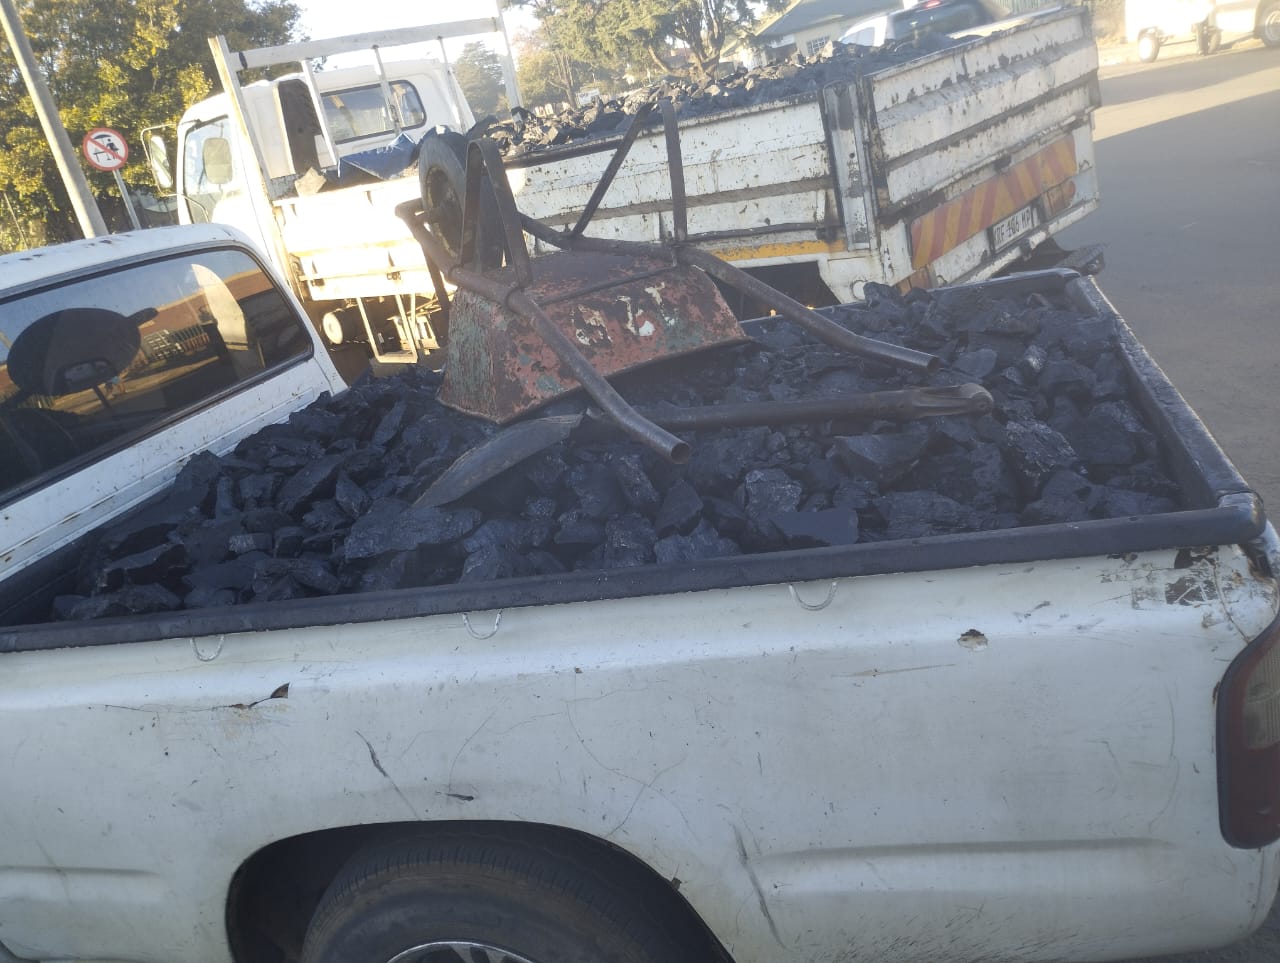 Nine suspects nabbed, three vehicles loaded with suspected stolen coal seized